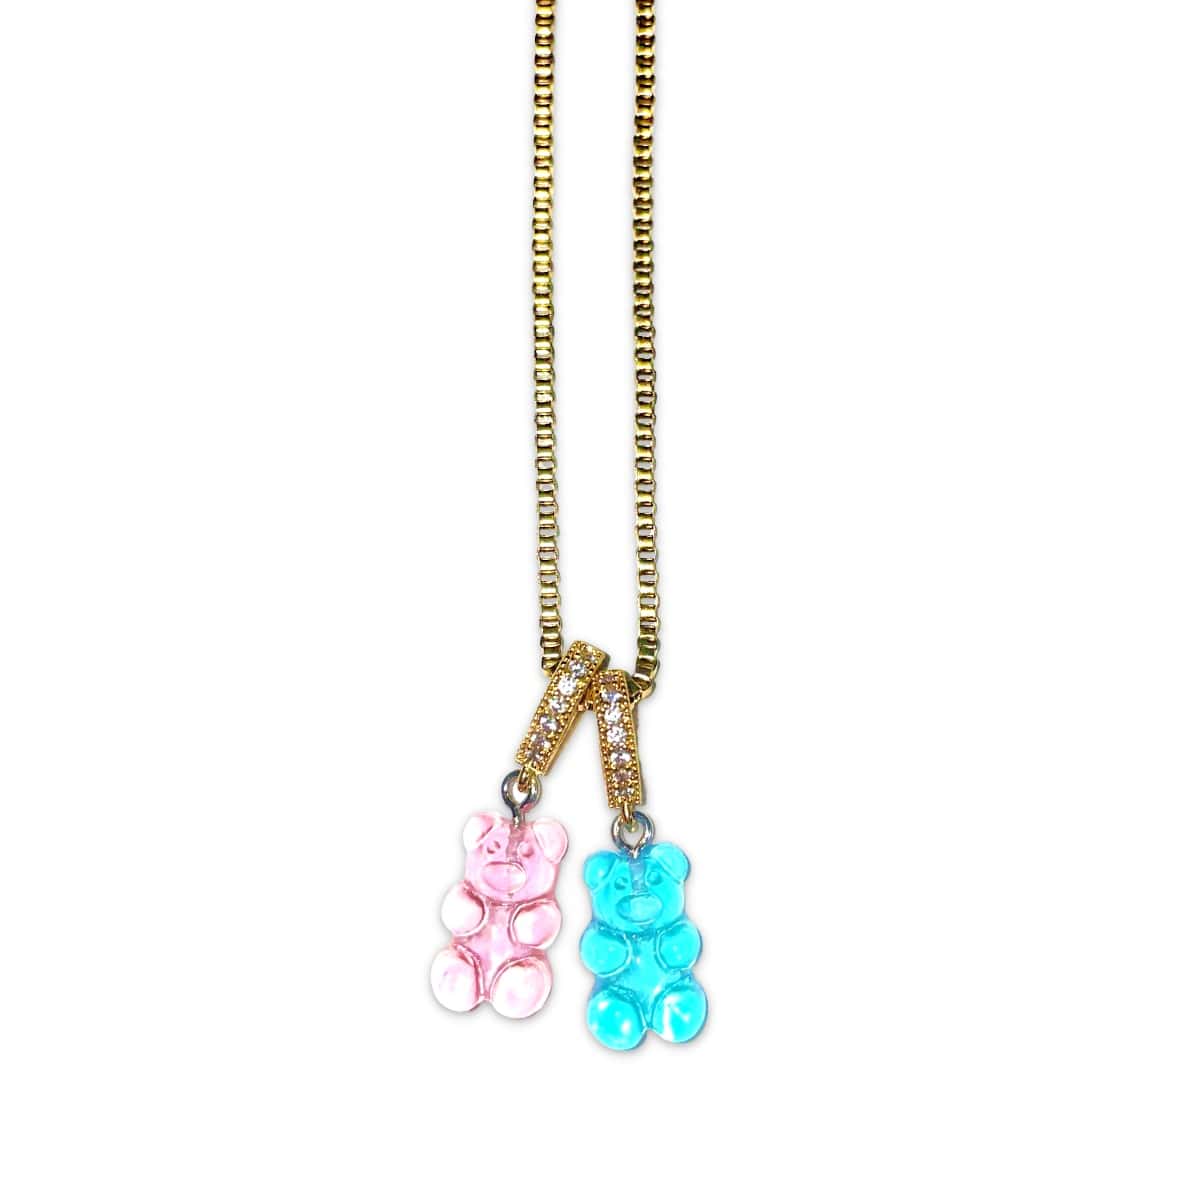 Cotton Candy Gummy Bear Necklace - 18 Inch Gold Chain With A Blue & Pink Bear Pendant - Gummy Bear Bling